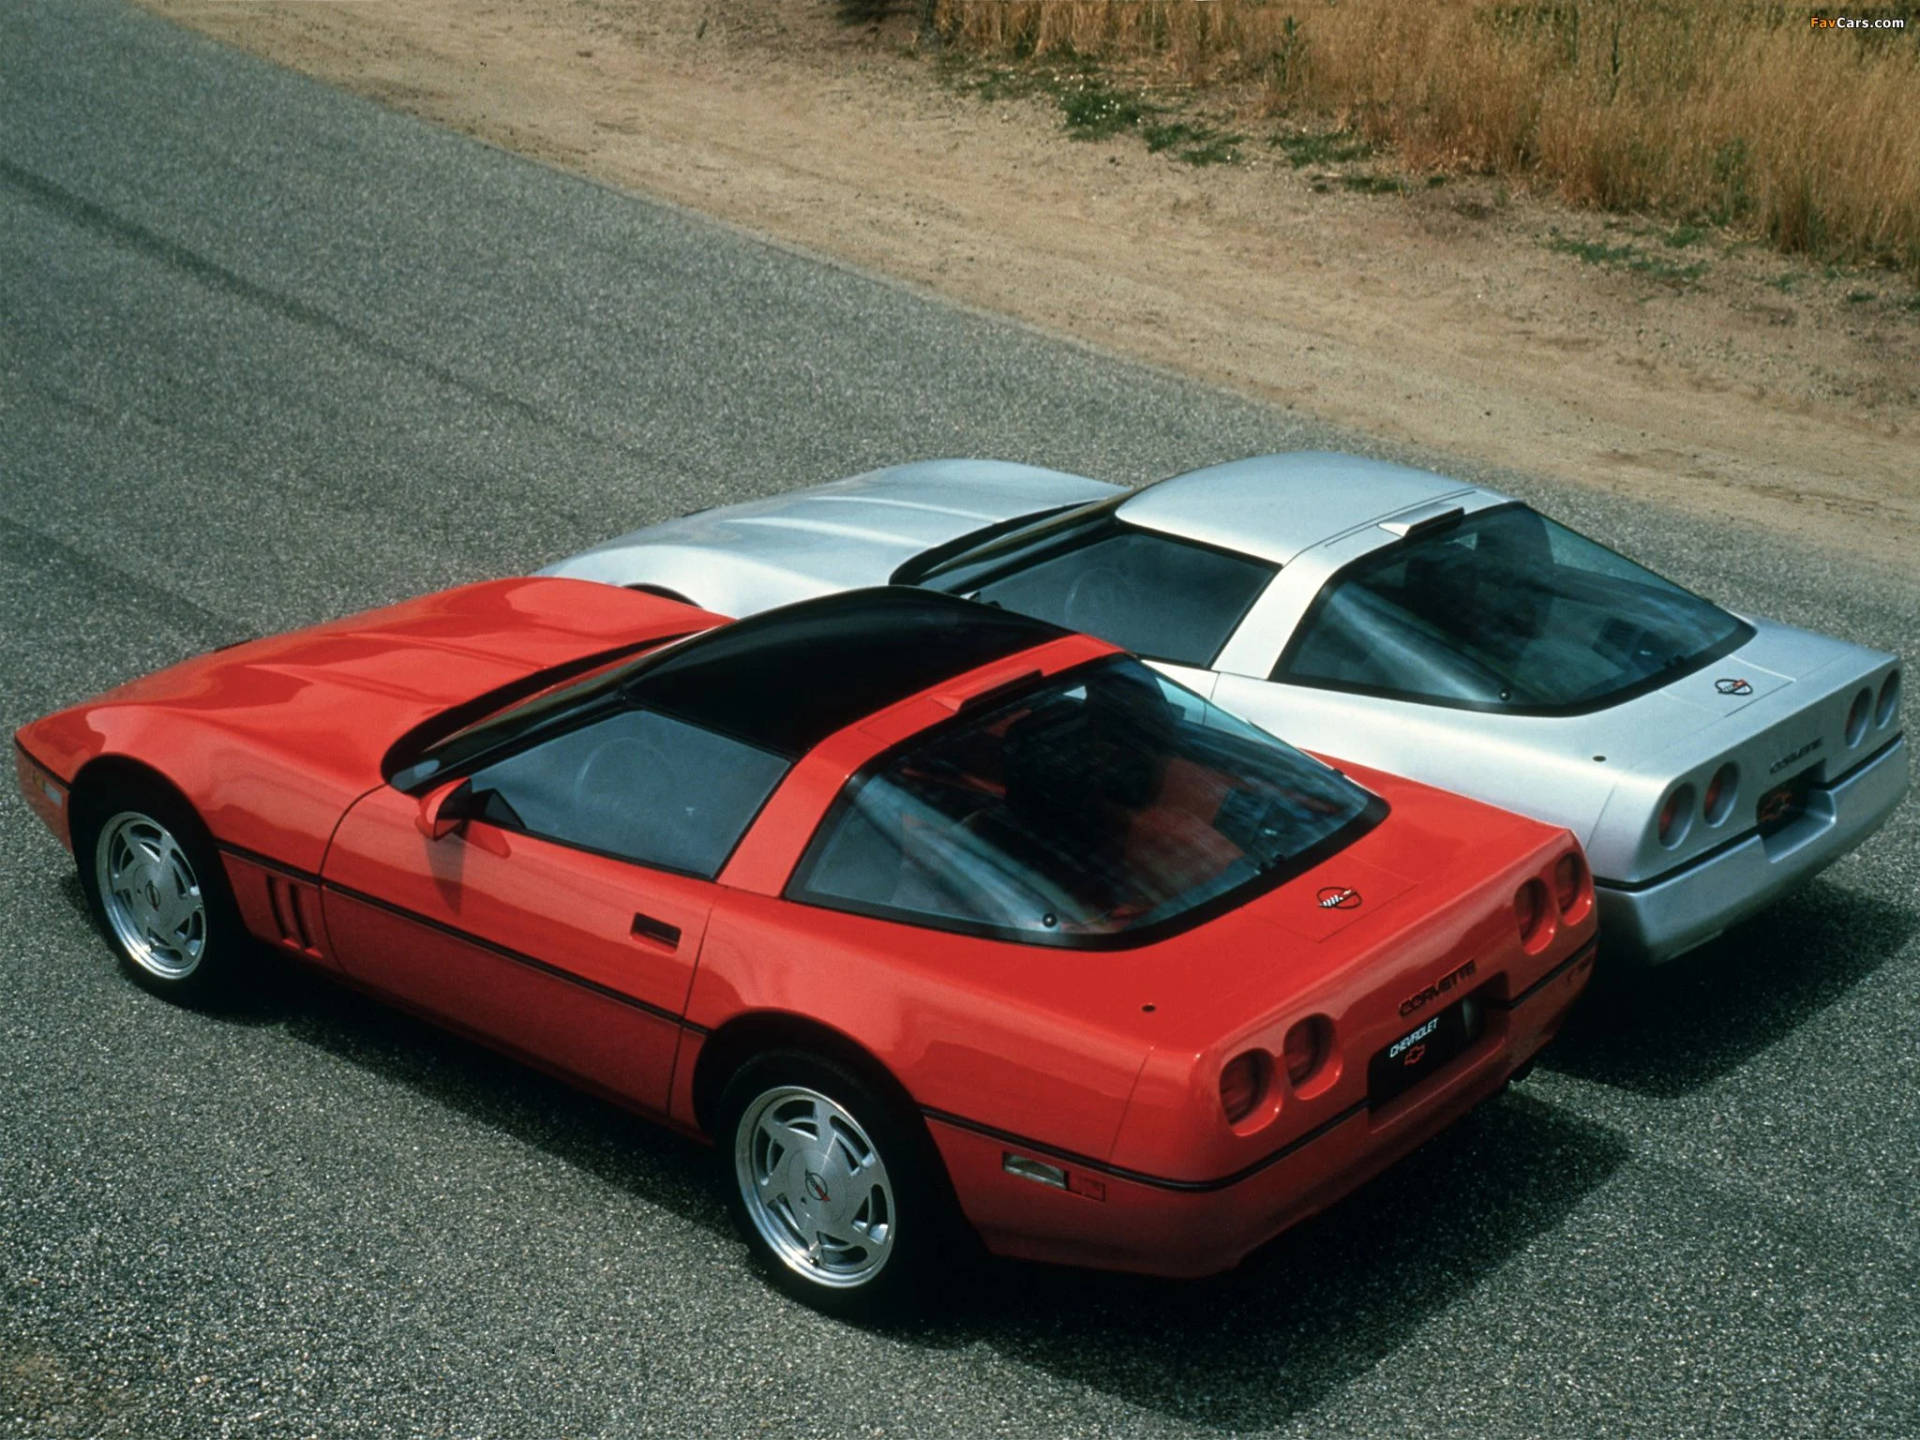 High-speed Elegance: Two C4 Corvettes Racing On Open Roads Background